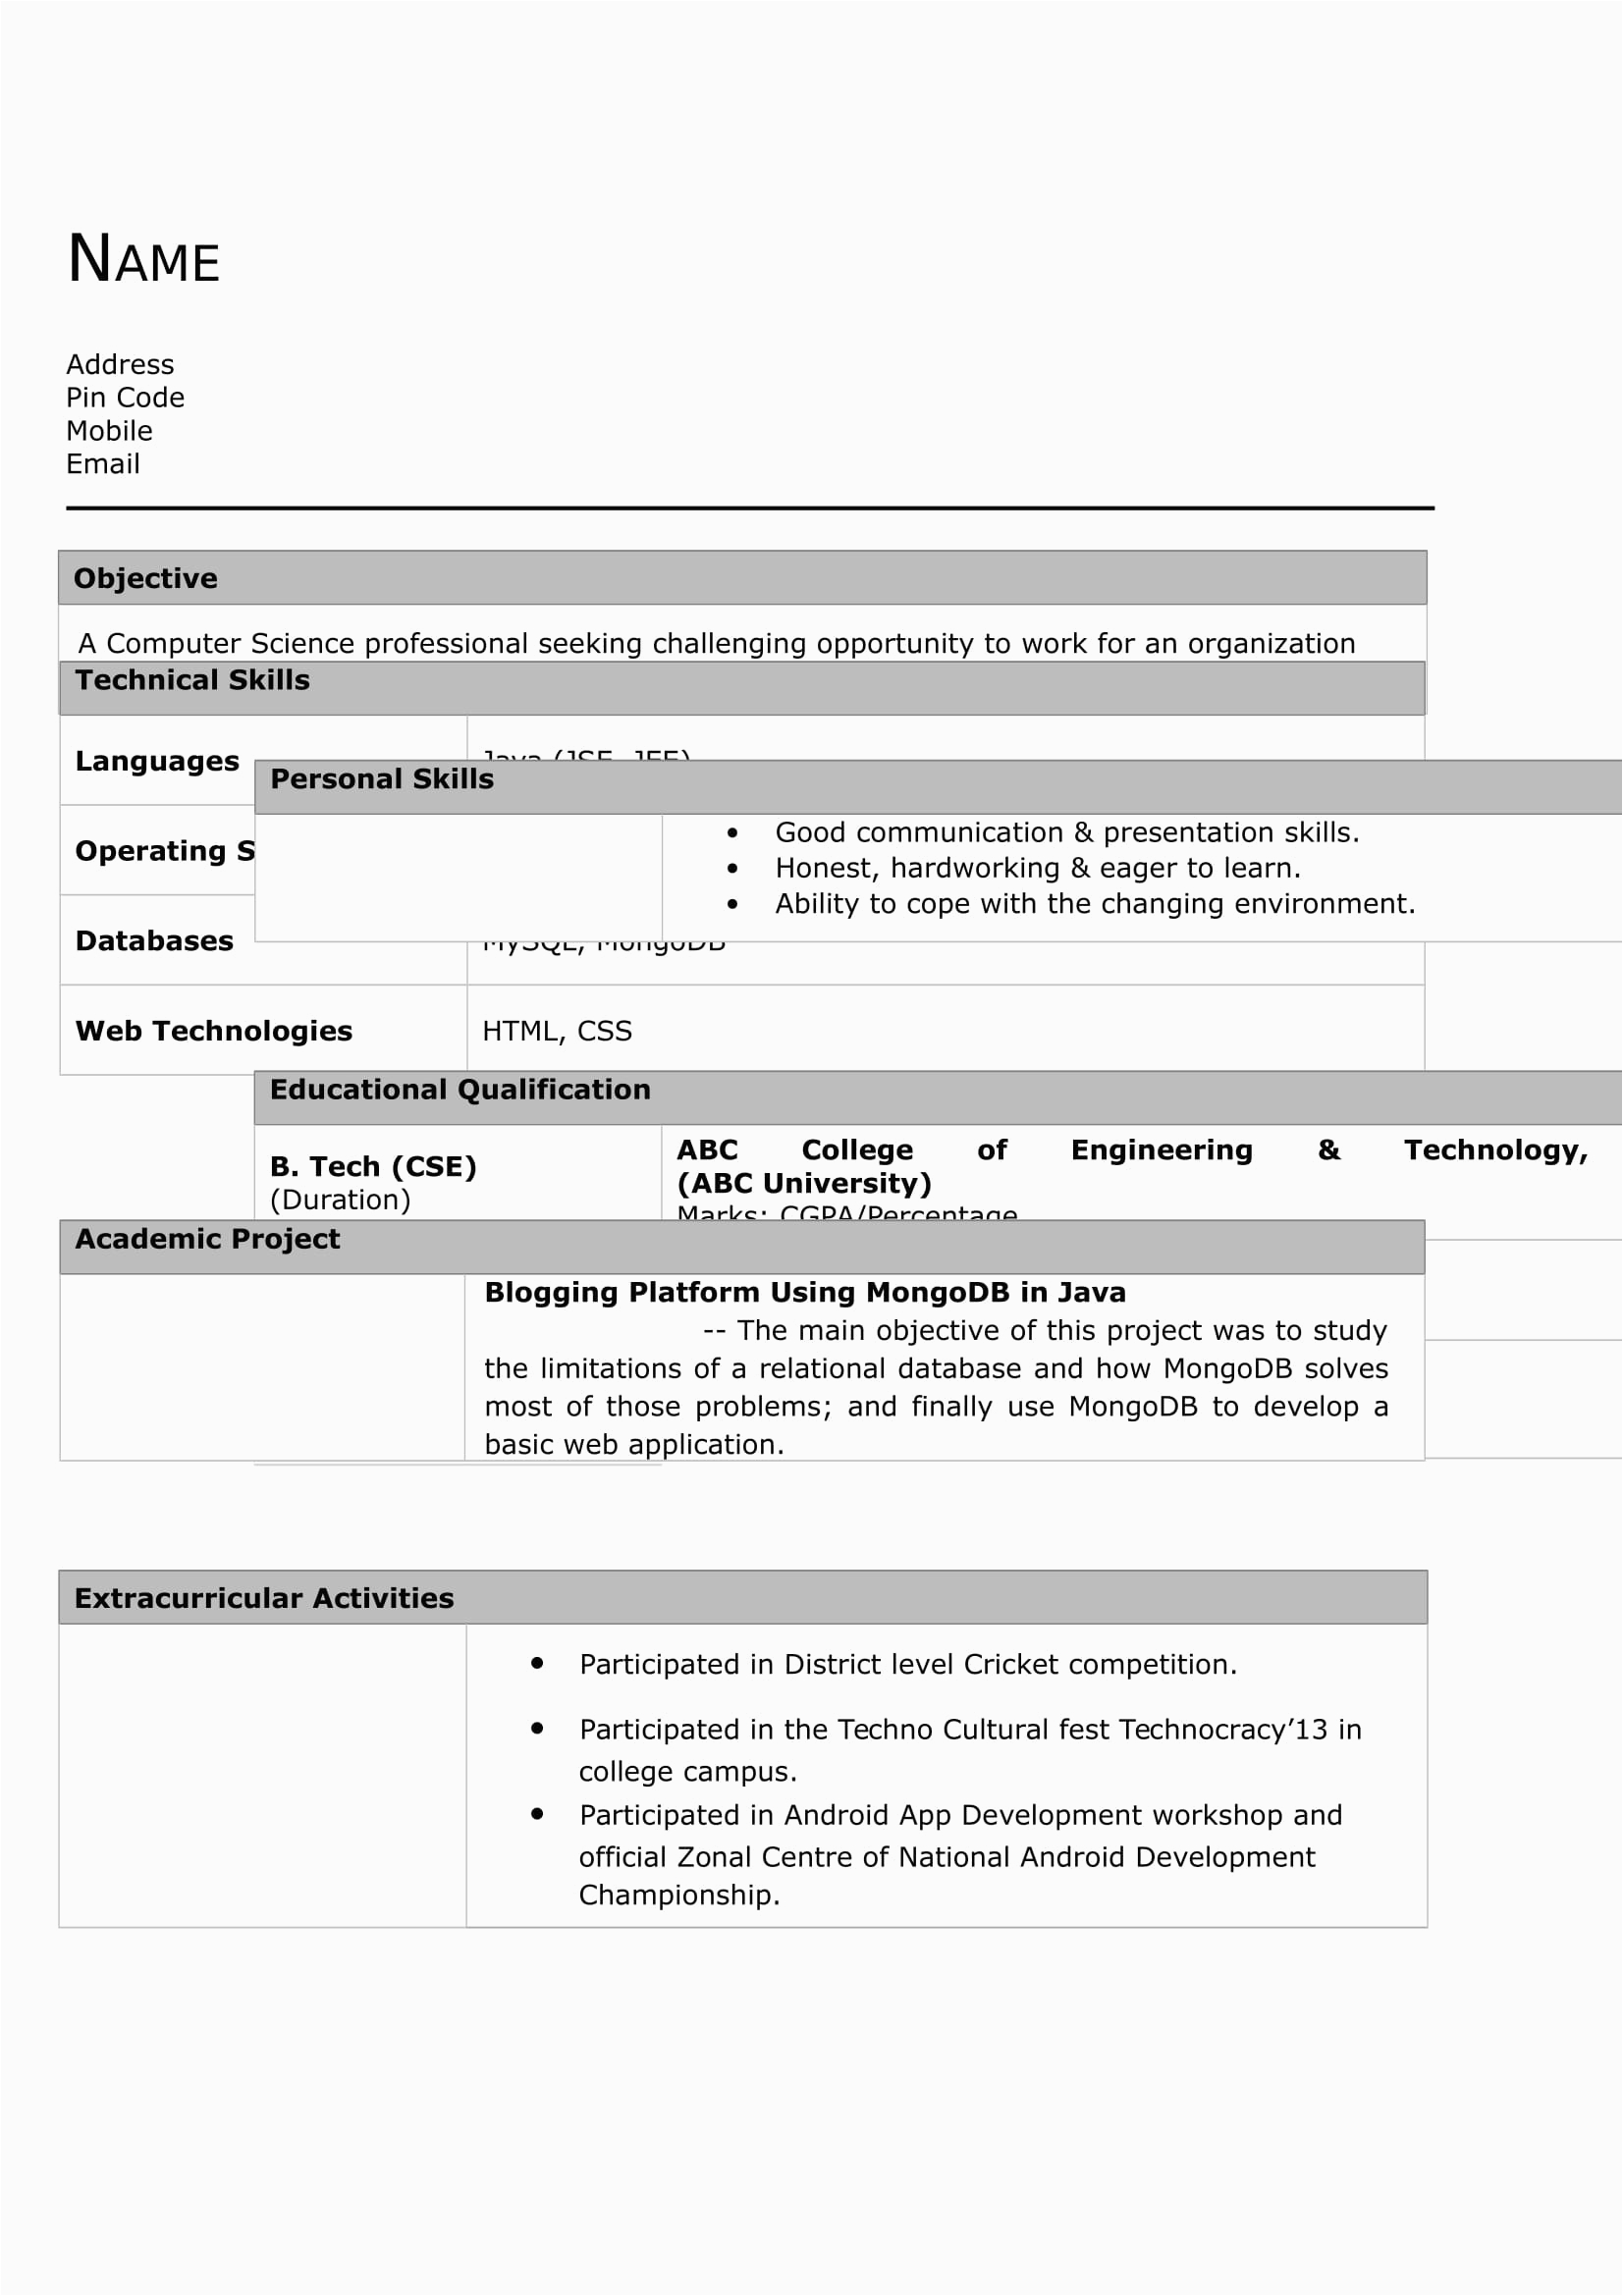 Resume Template Download for Engineering Freshers 32 Resume Templates for Freshers Download Free Word format